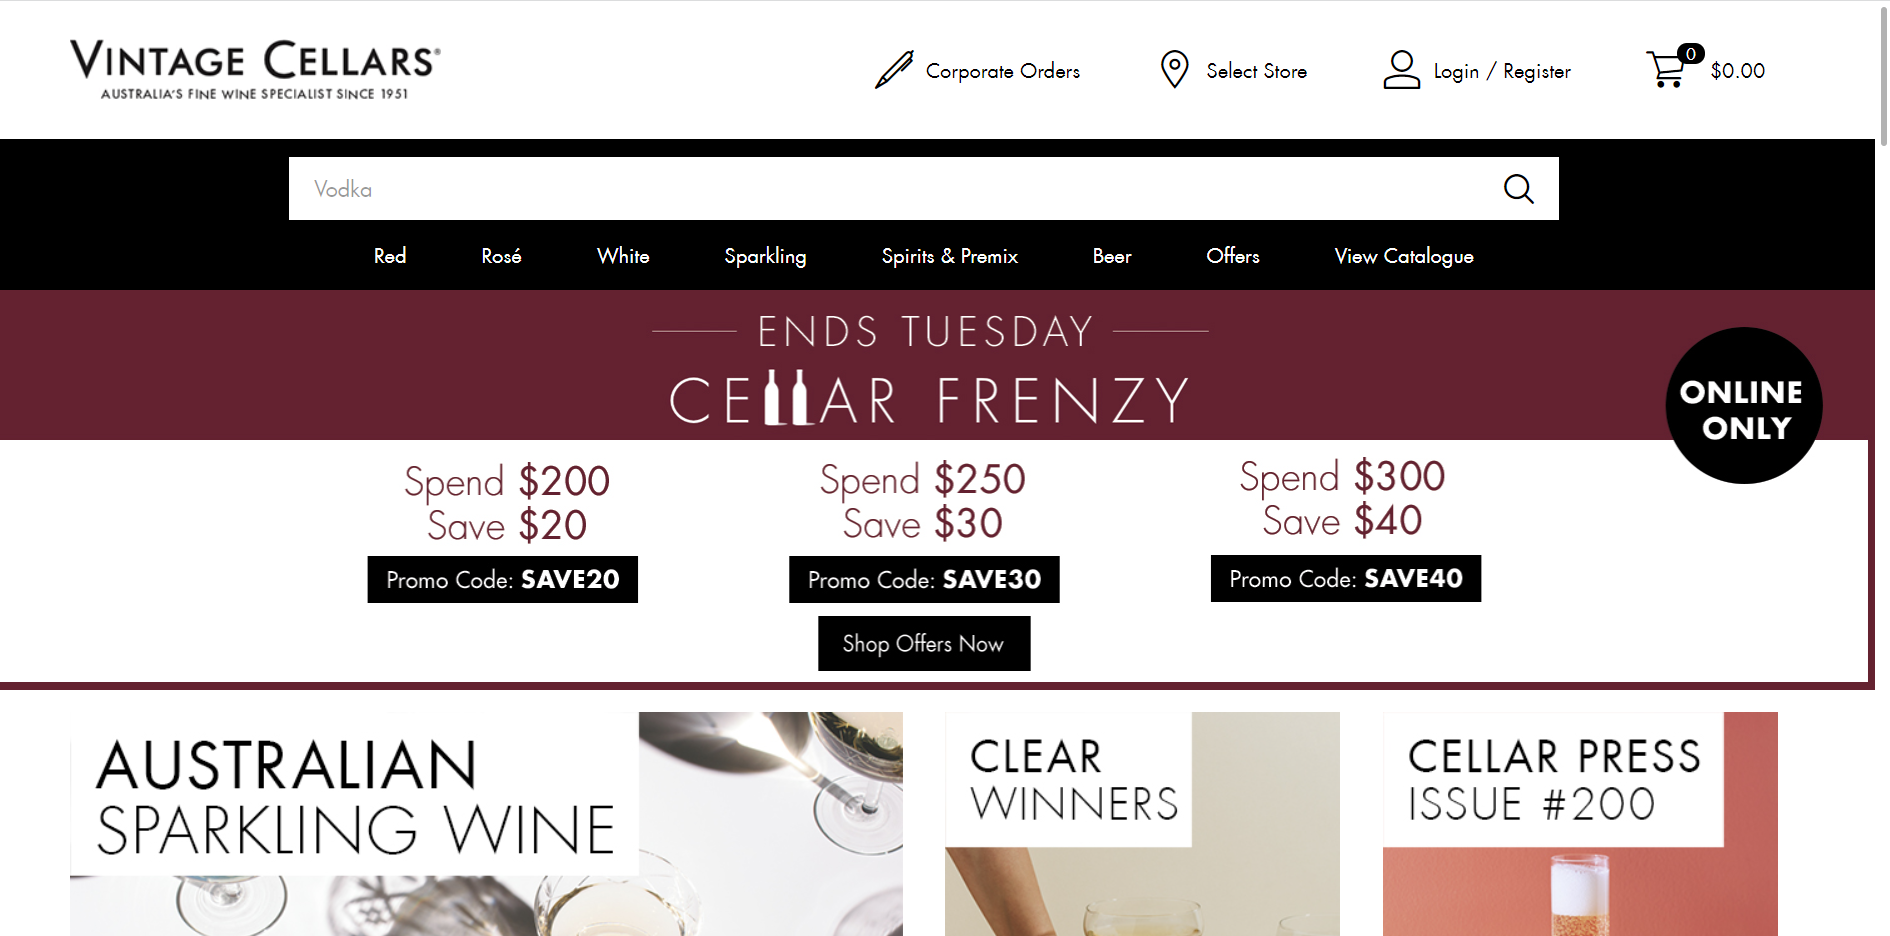 Vintage Cellars spend & save extra up to $40 OFF with discount code